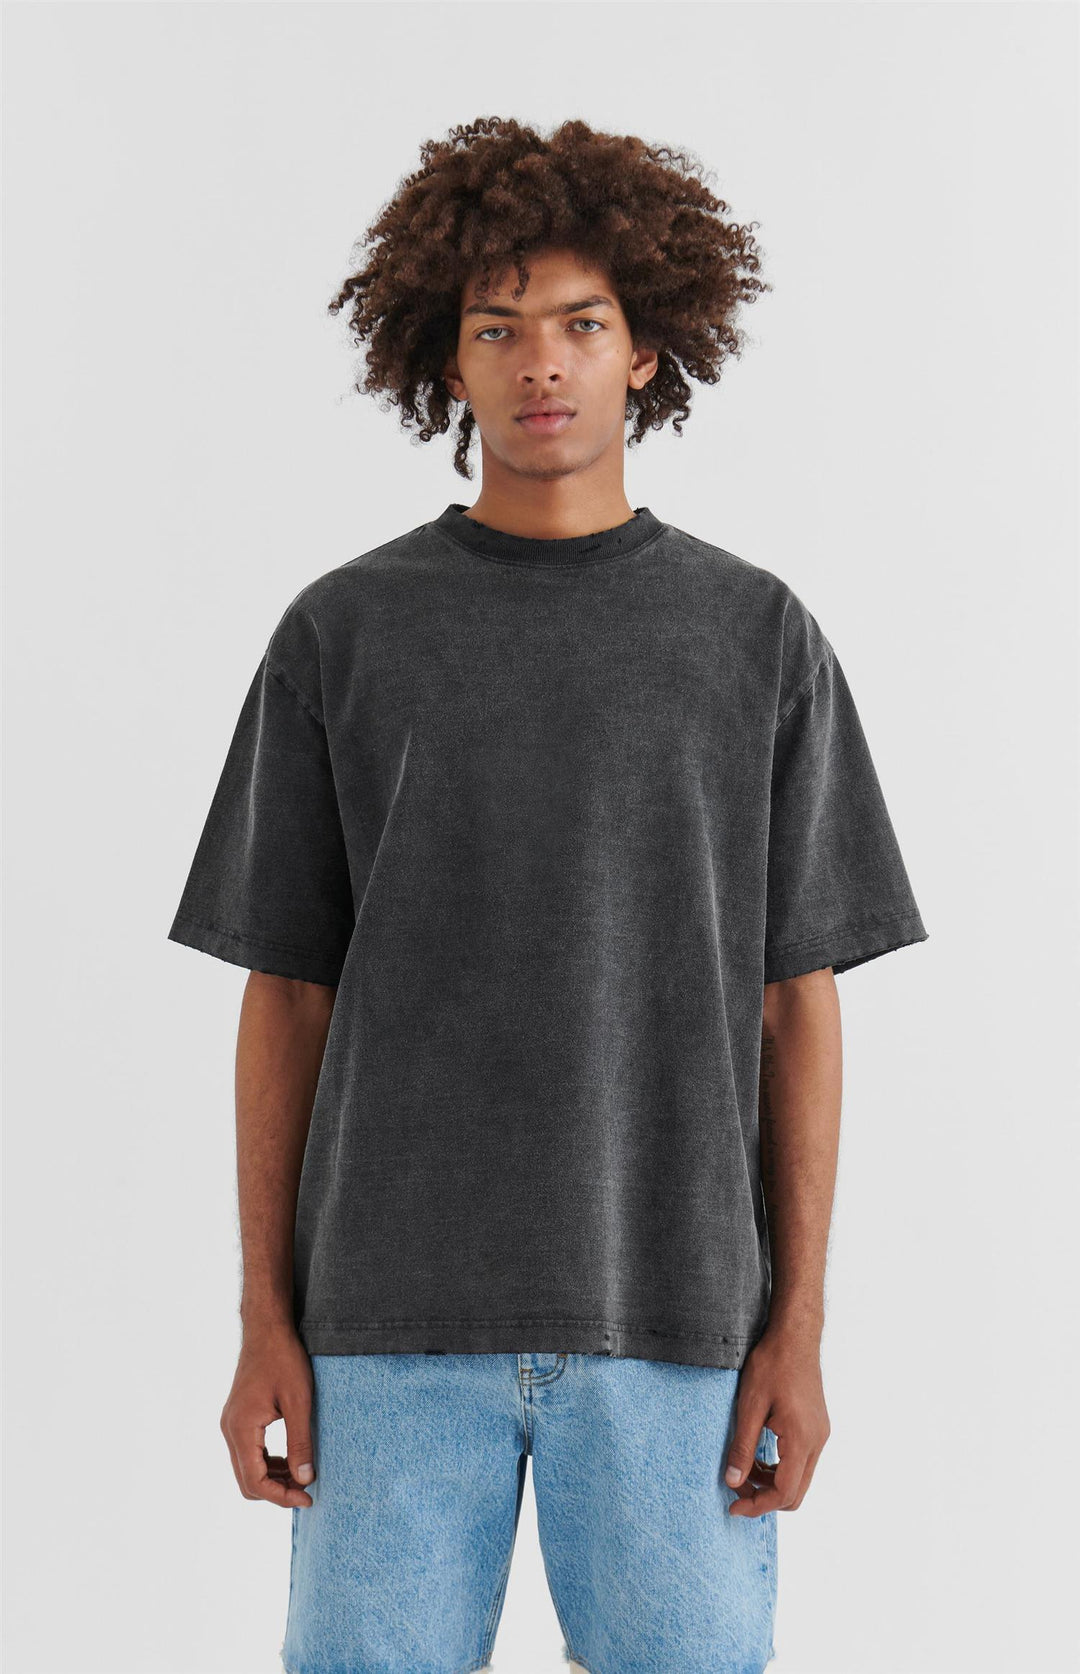 AXEL ARIGATO - Wes Distressed T-Shirt - Dale